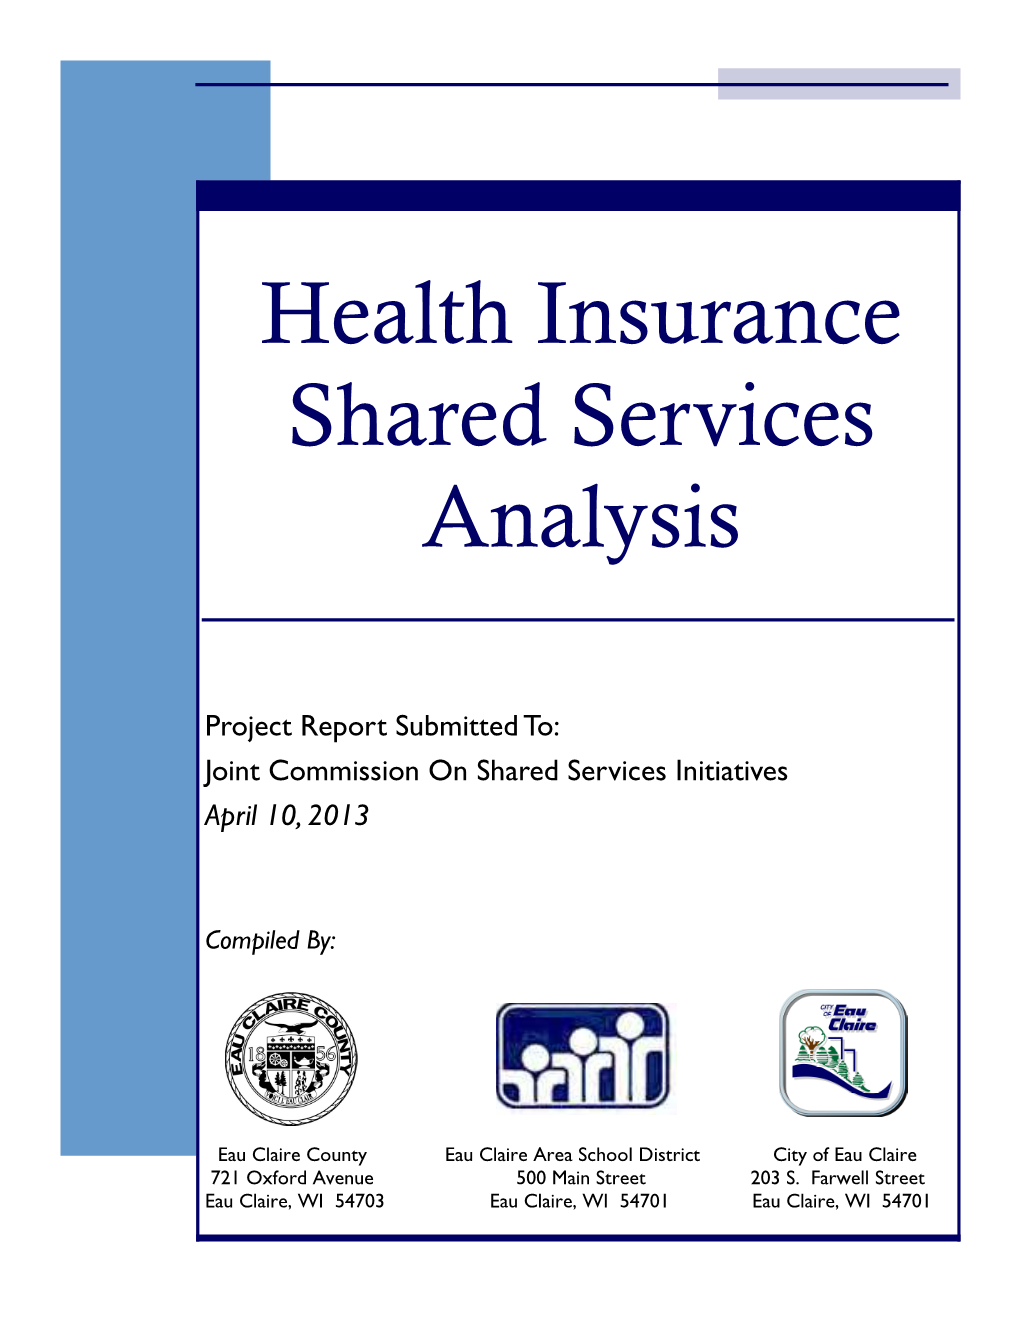 Health Insurance Shared Services Analysis